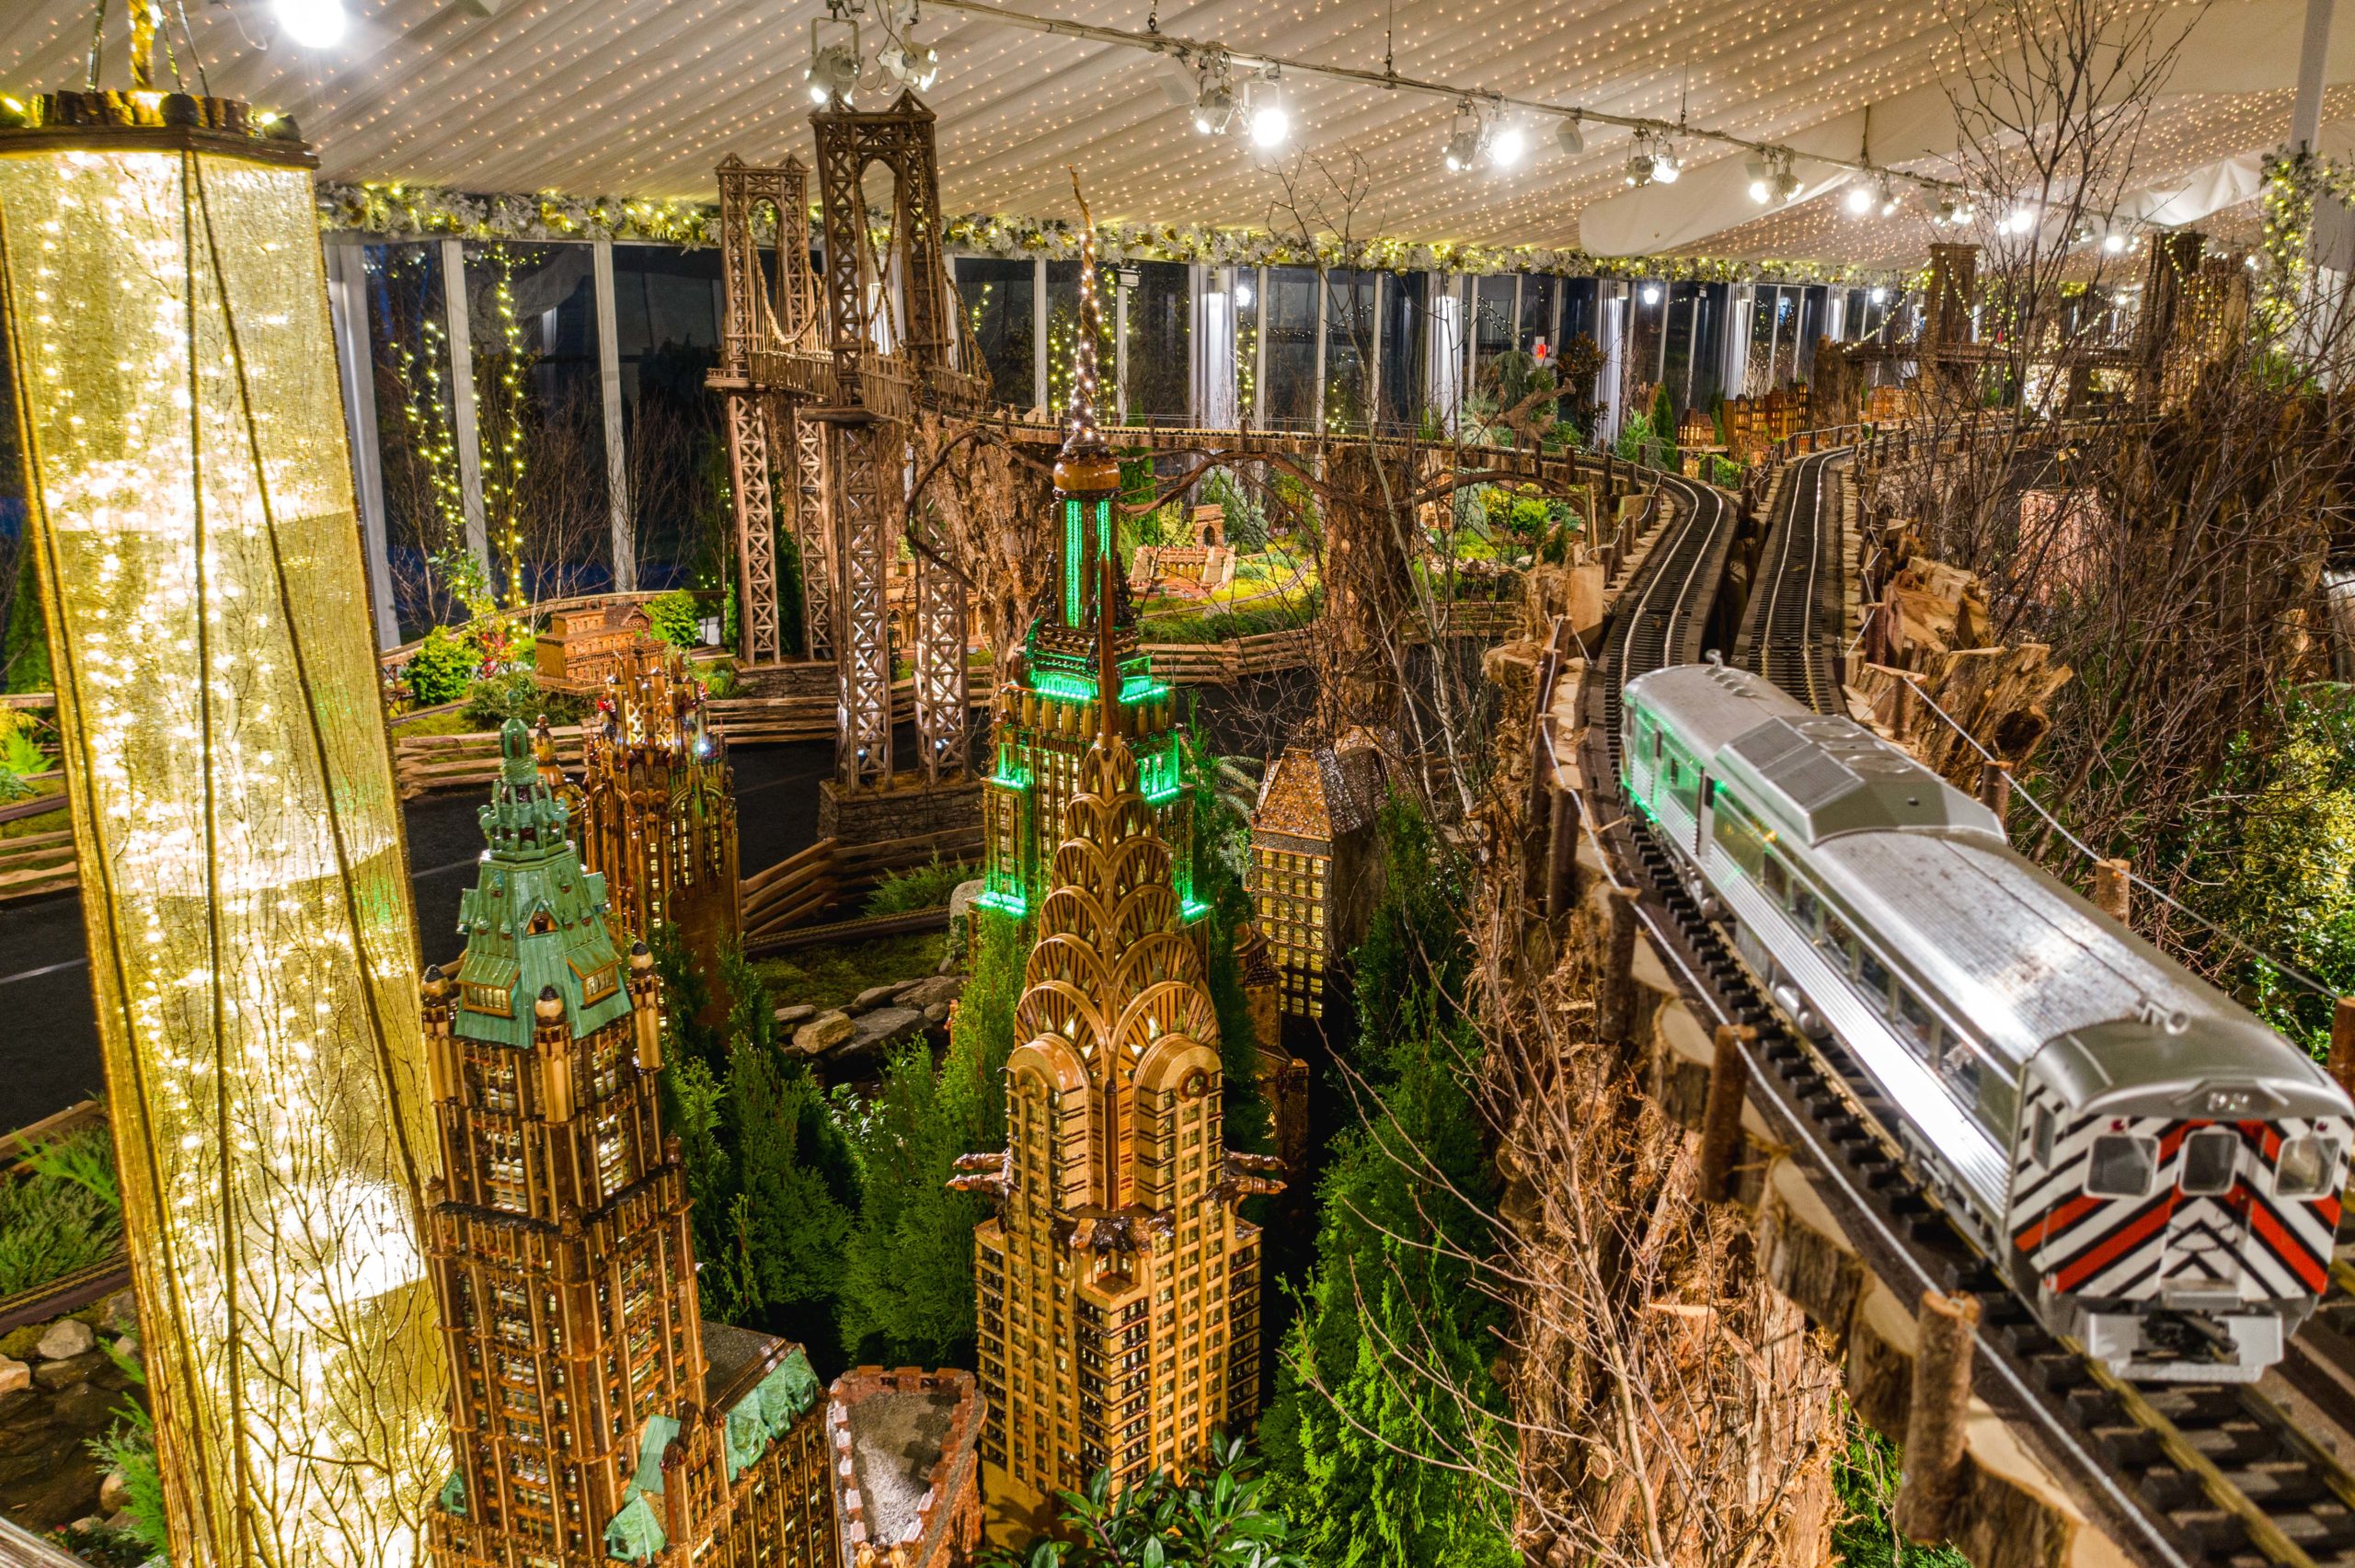 Holiday Train Show 2019 2 Photo Credit NYBG Photo by Marlon Co. scaled